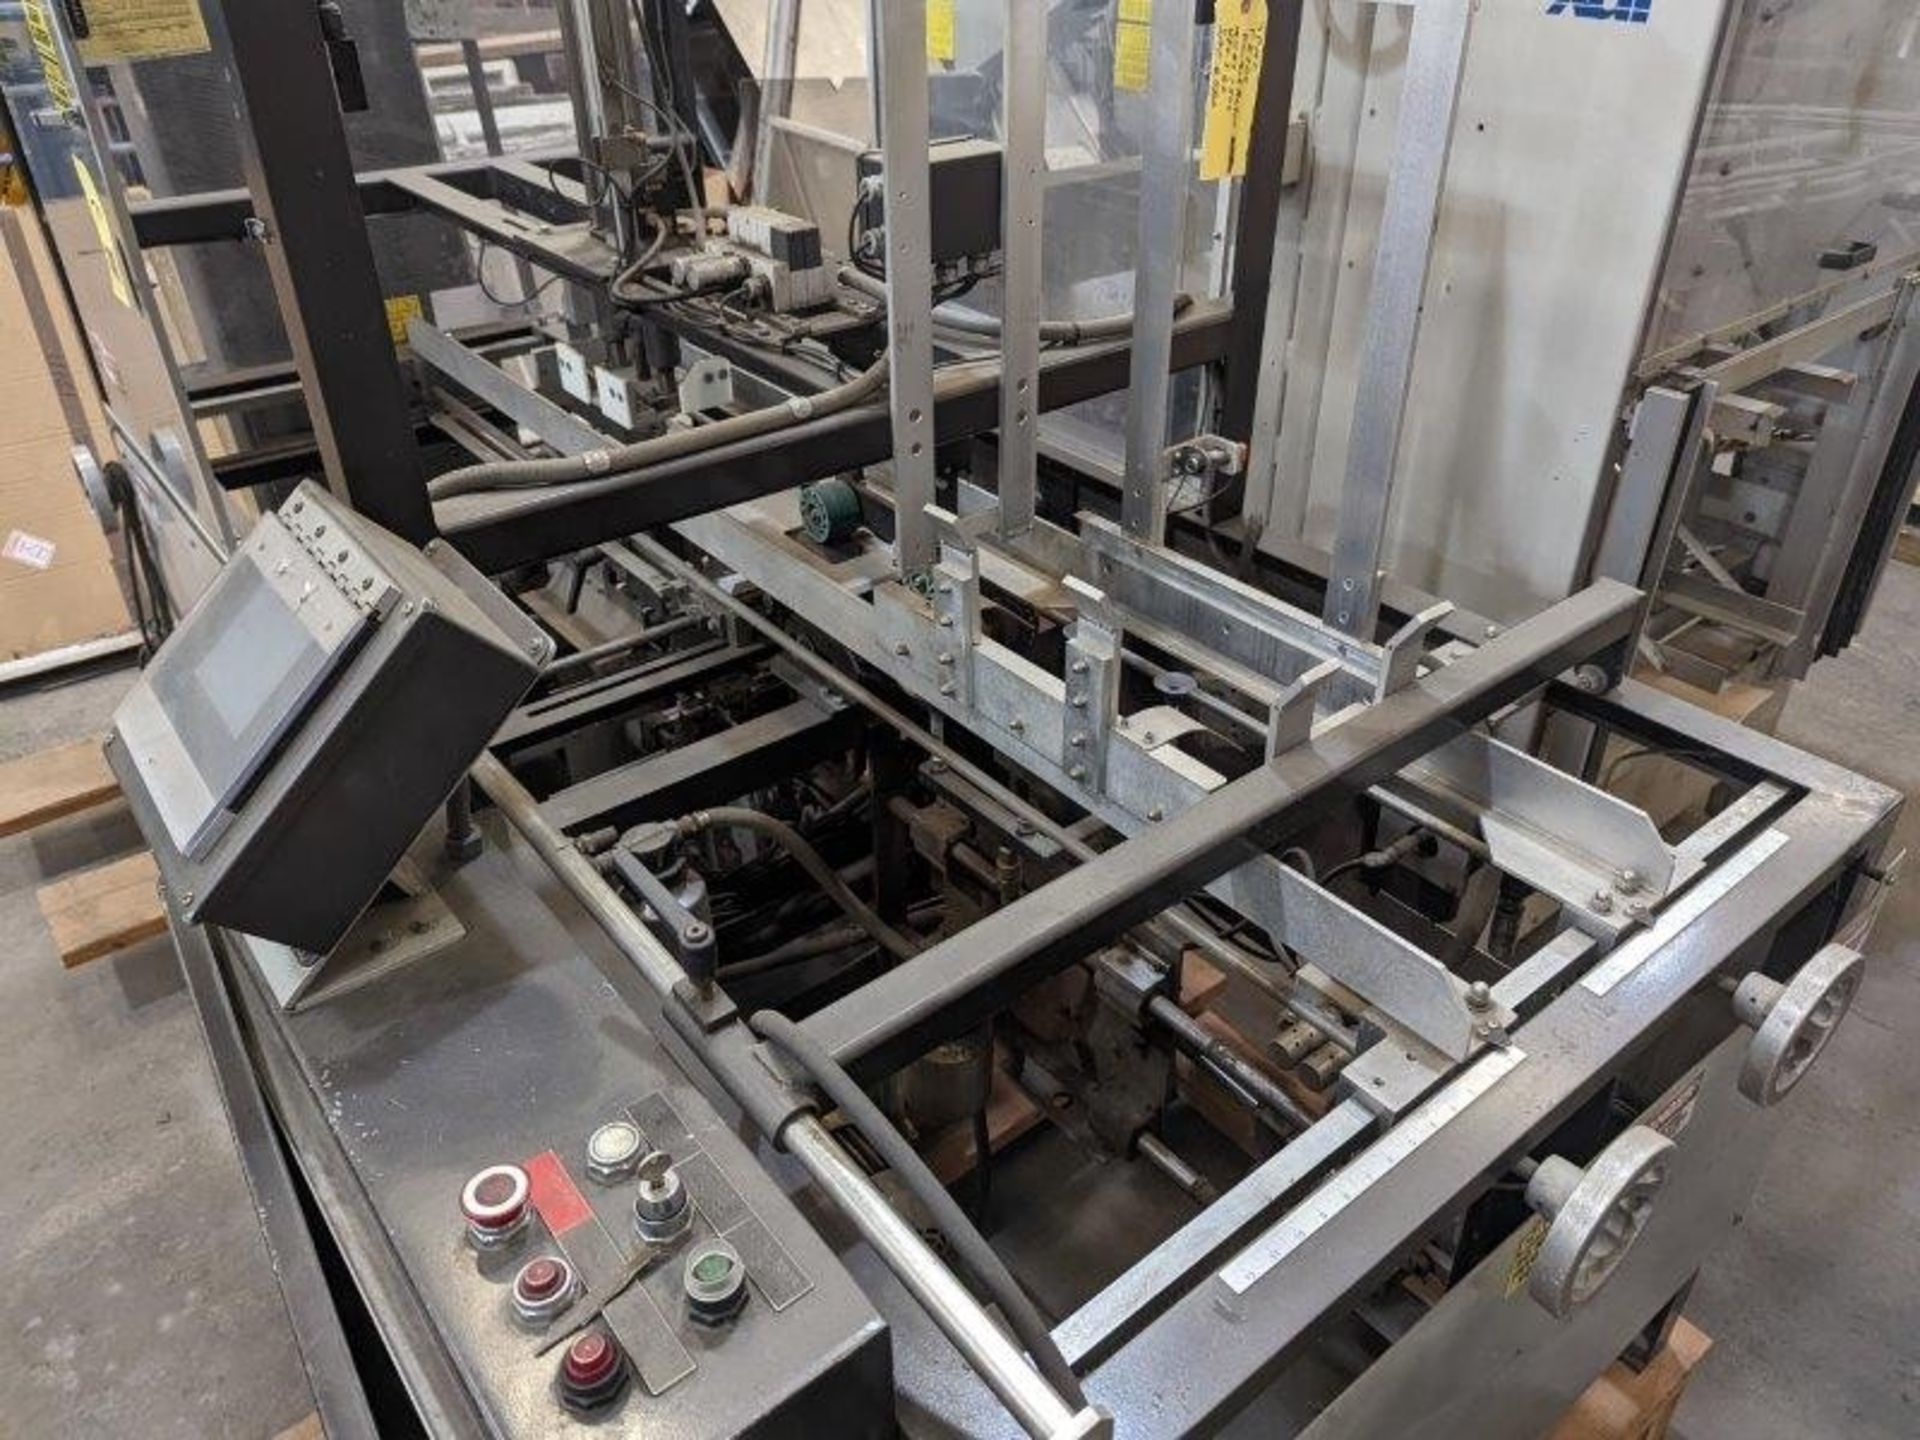 SPMC (Southern Packaging) Automatic Tray Former for Self-Locking Trays; Model TE700VF DOUBLELOCK ( - Image 2 of 4